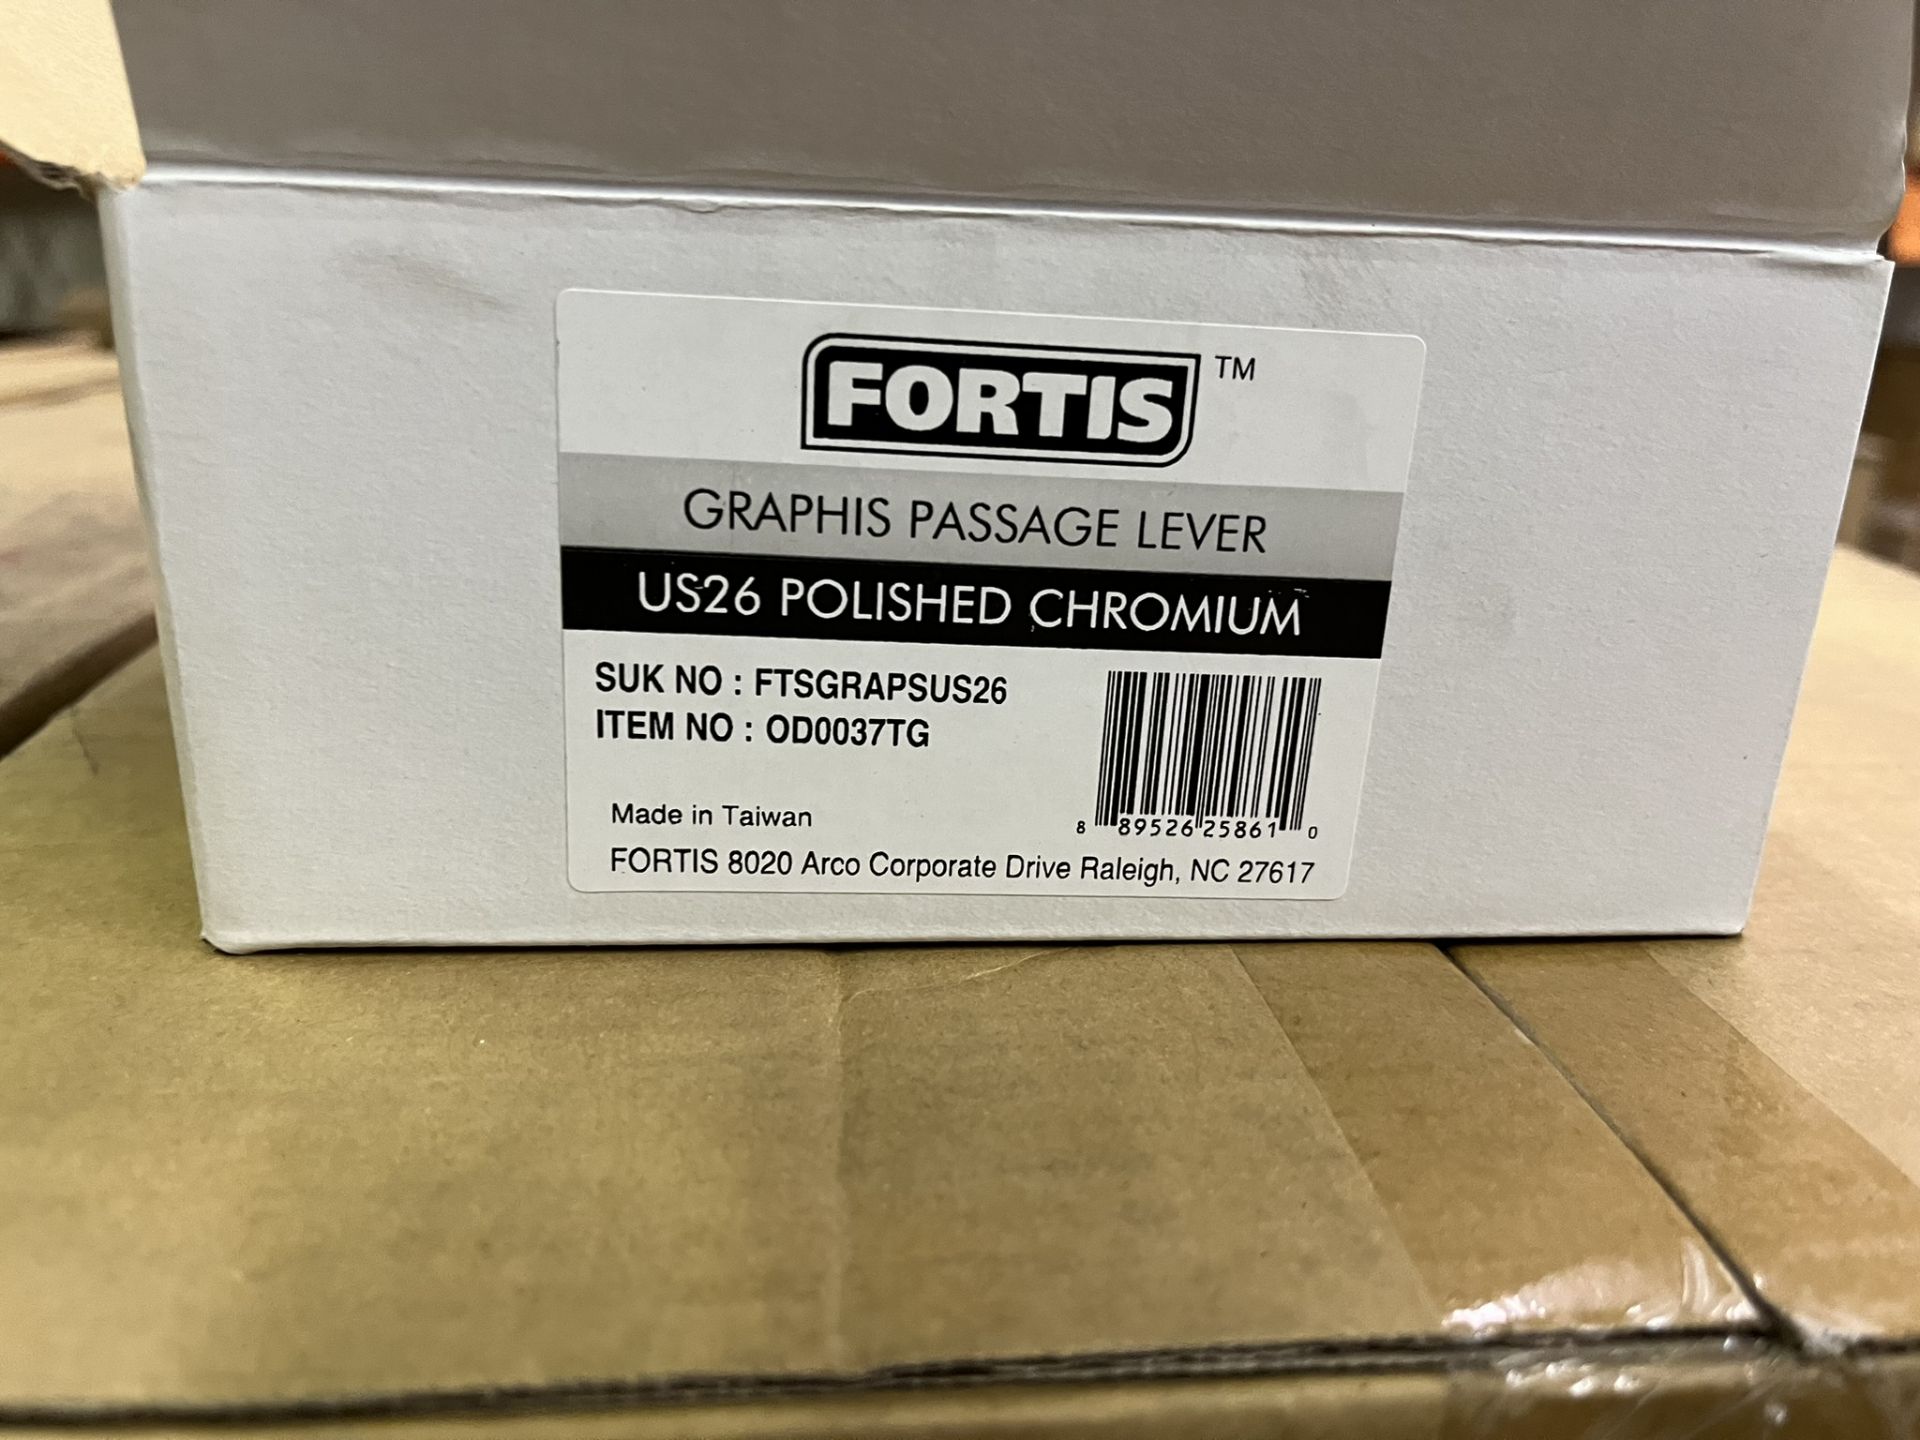 (10) FORTIS GRAPHIS PASSAGE LEVERS US26 POLISHED CHROMIUM